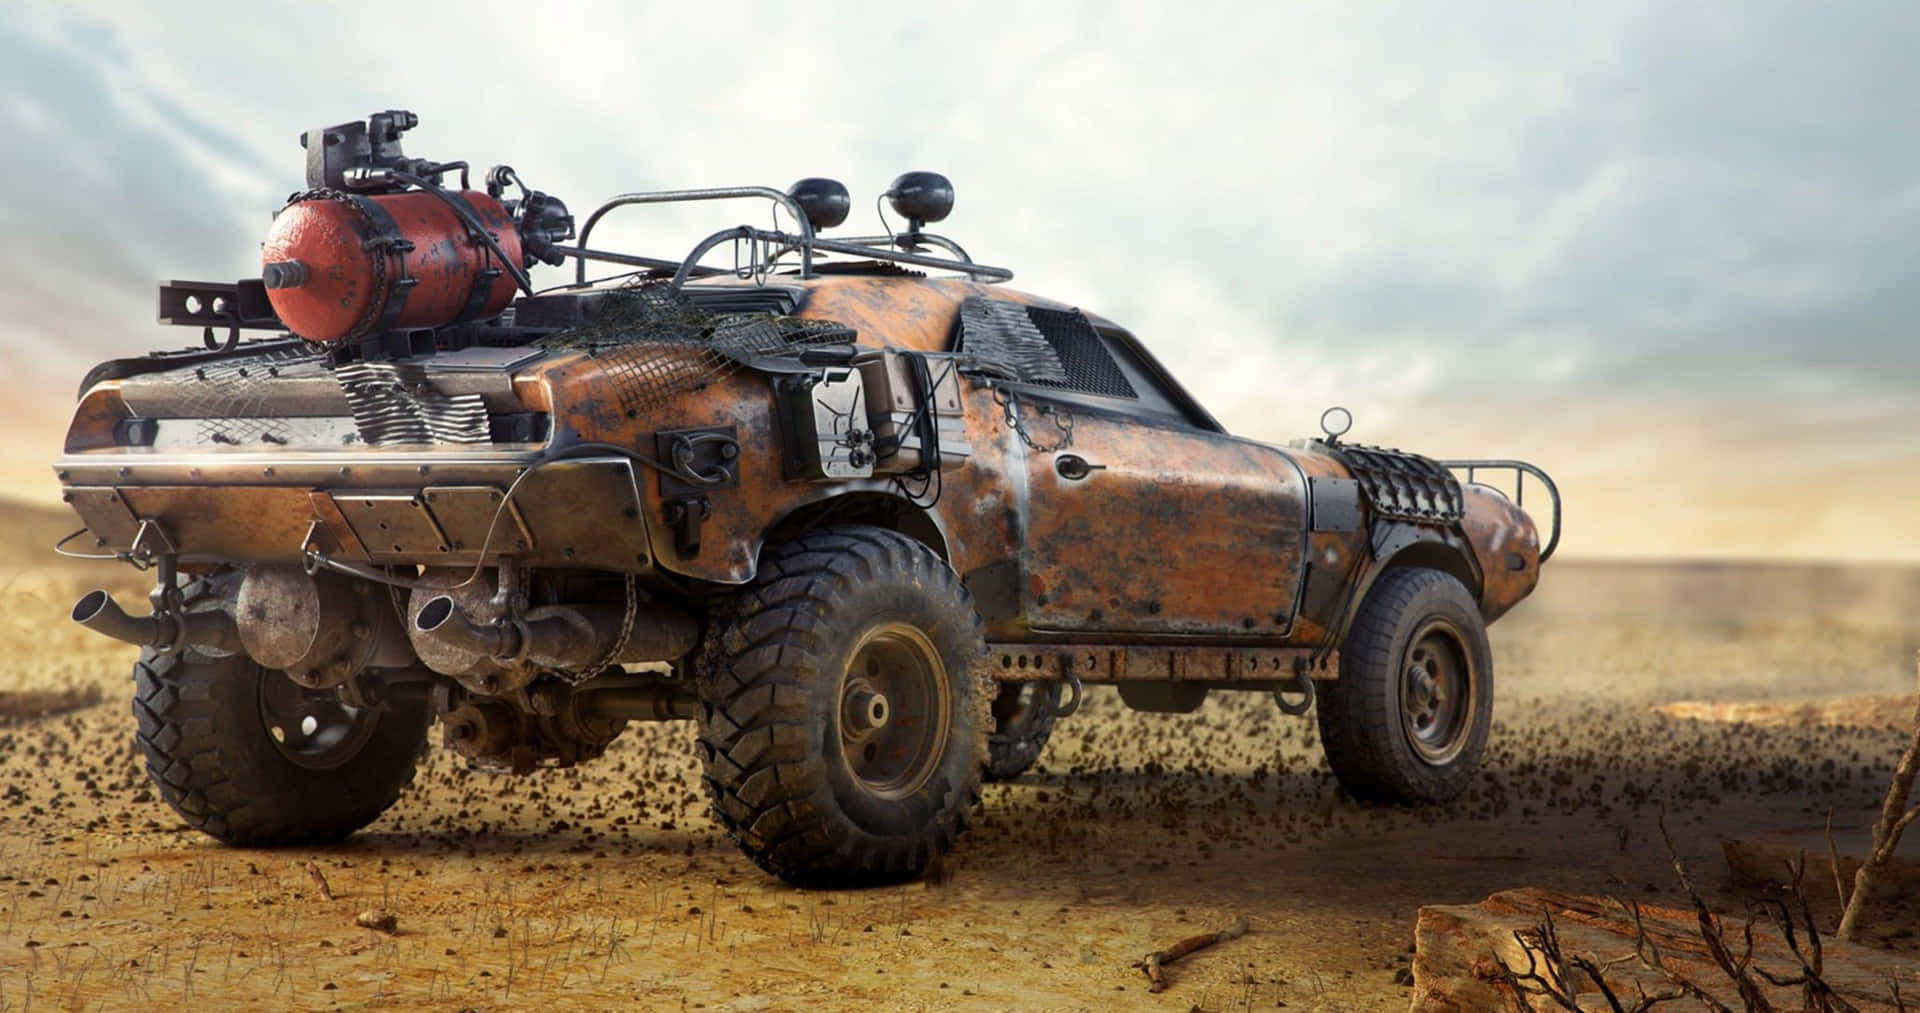 Mad Max Style Post Apocalyptic Vehicle Wallpaper